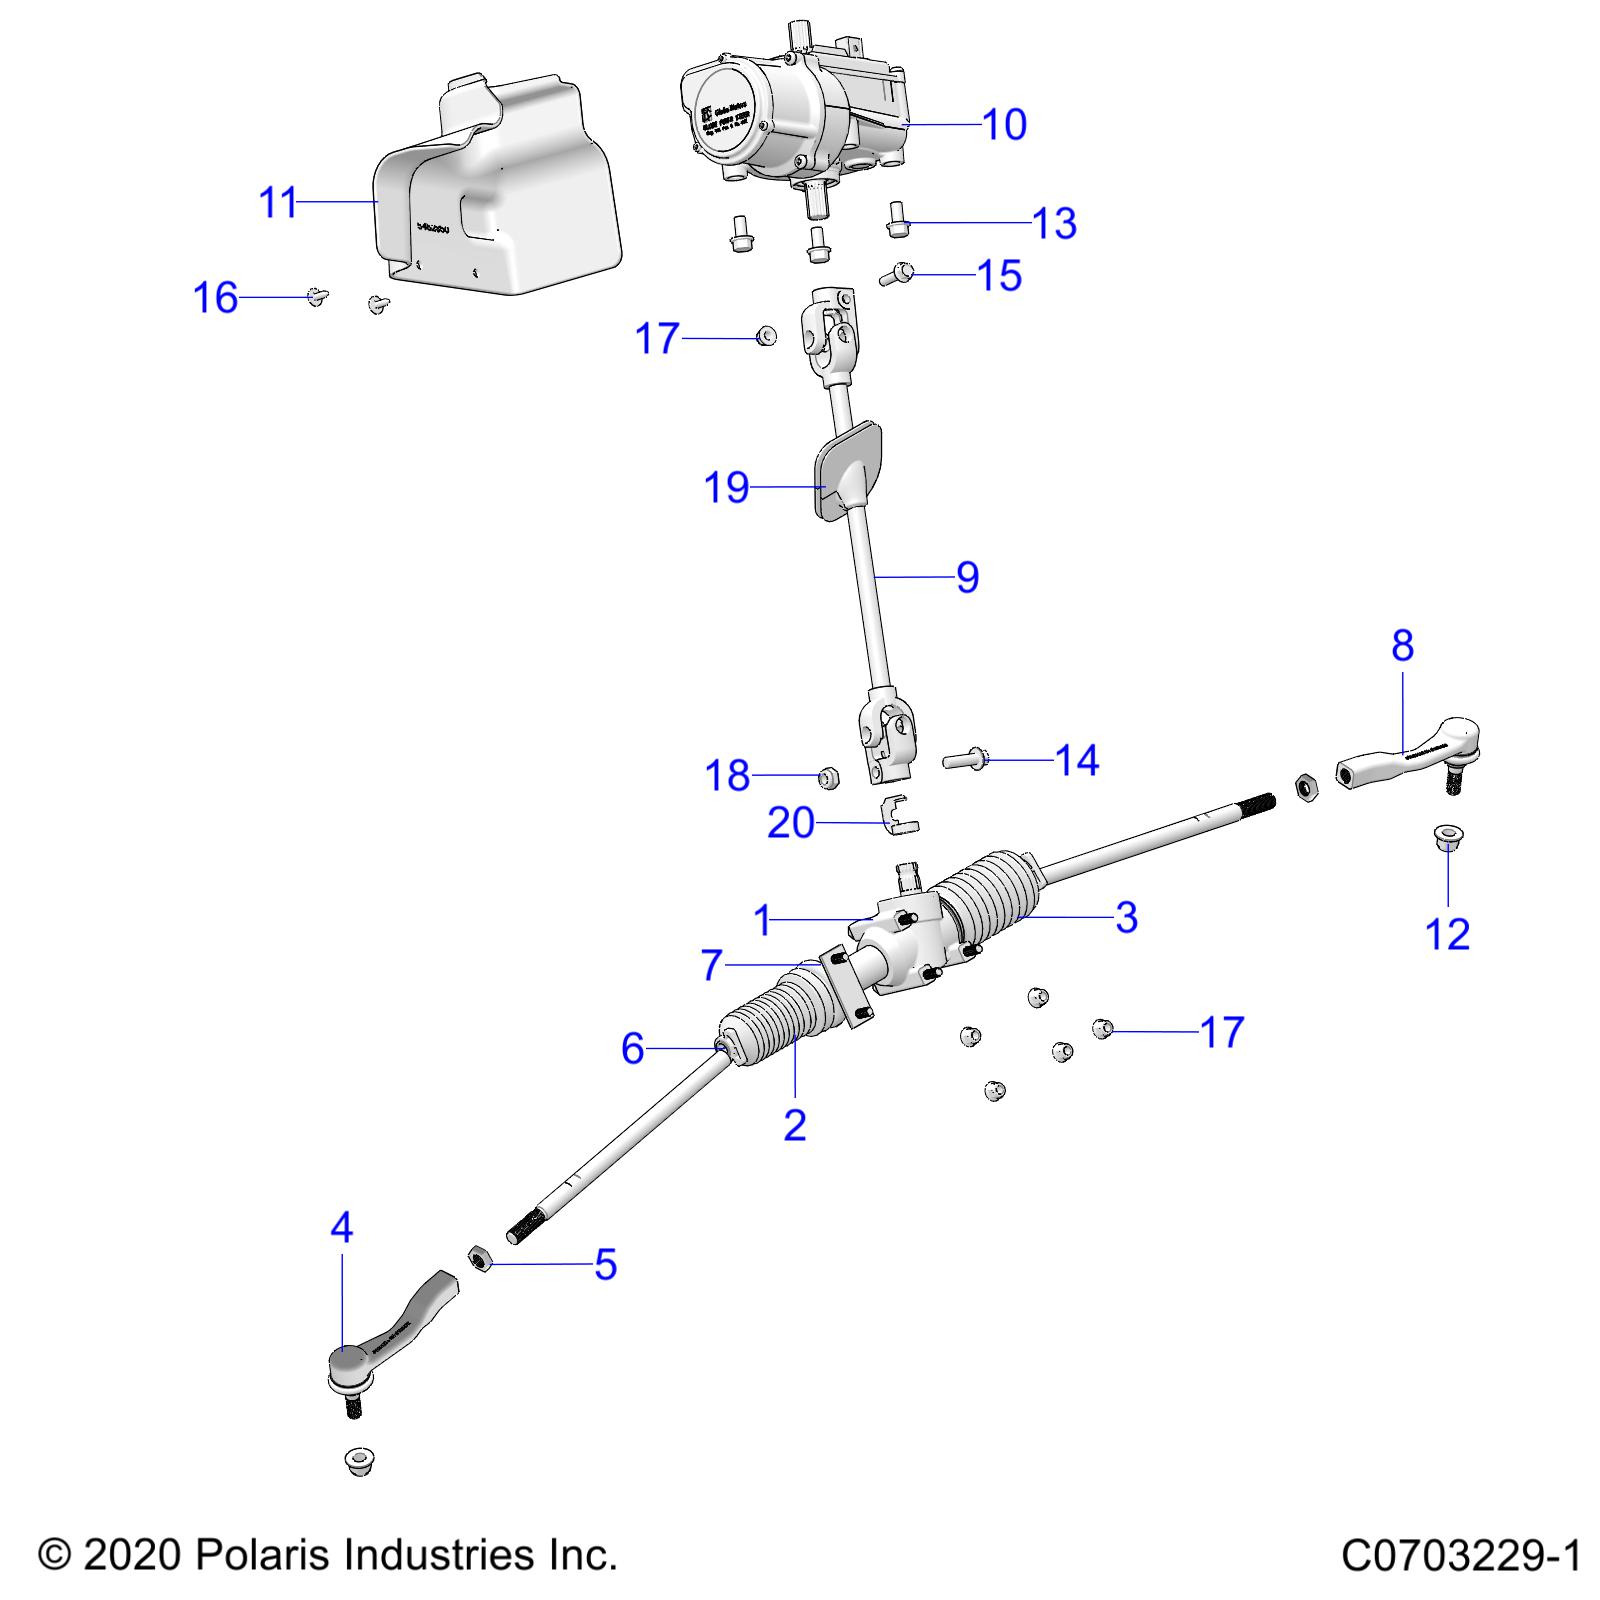 Part Number : 2414873 2.0T POWER STEERING ASSEMBLY